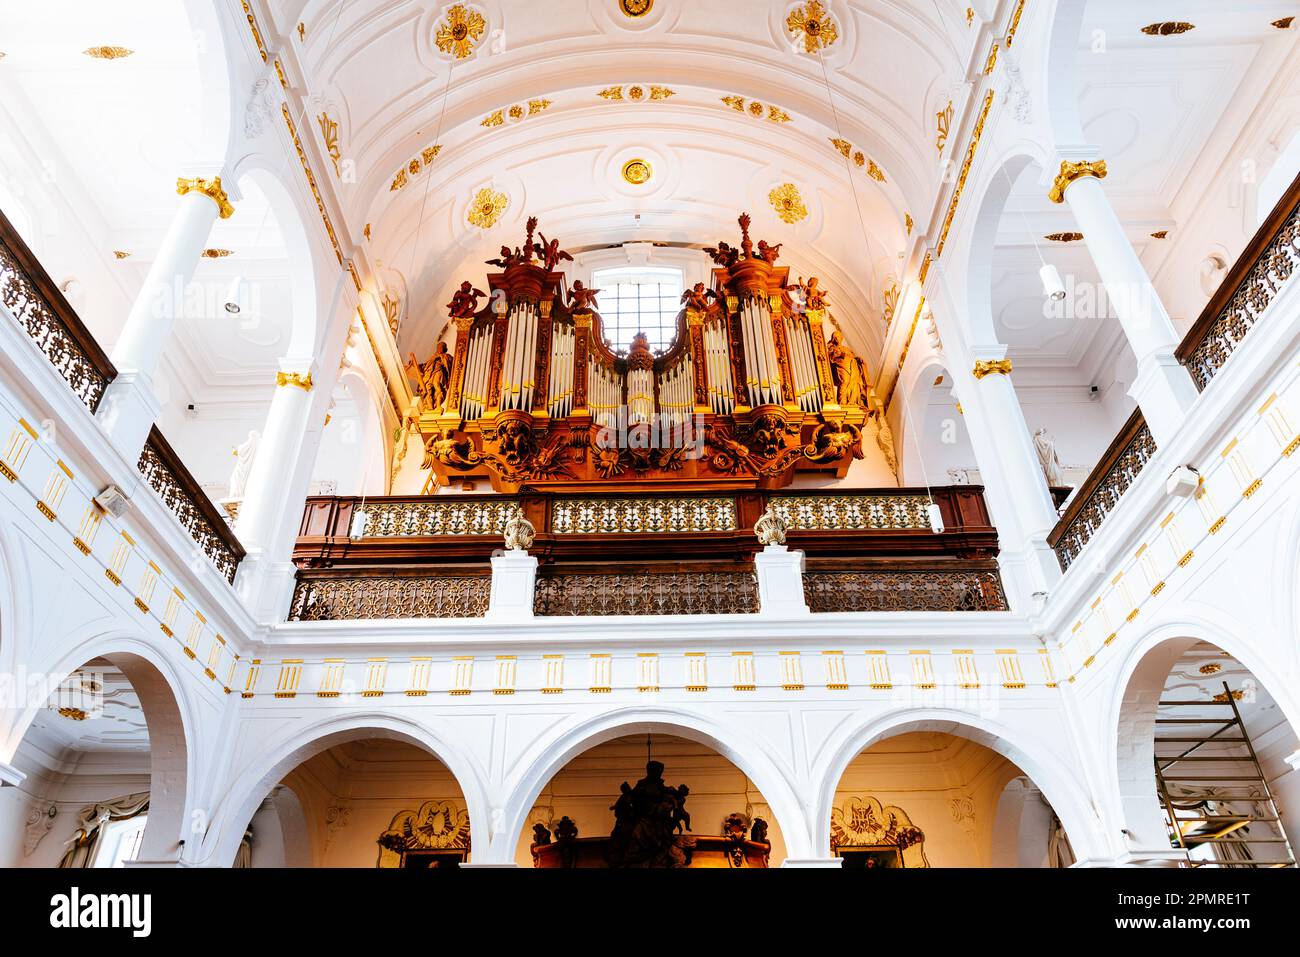 The organ. The original organ did not survive the 1718 fire and about 1720 the present organ was installed. St. Charles Borromeo Church is a church in Stock Photo